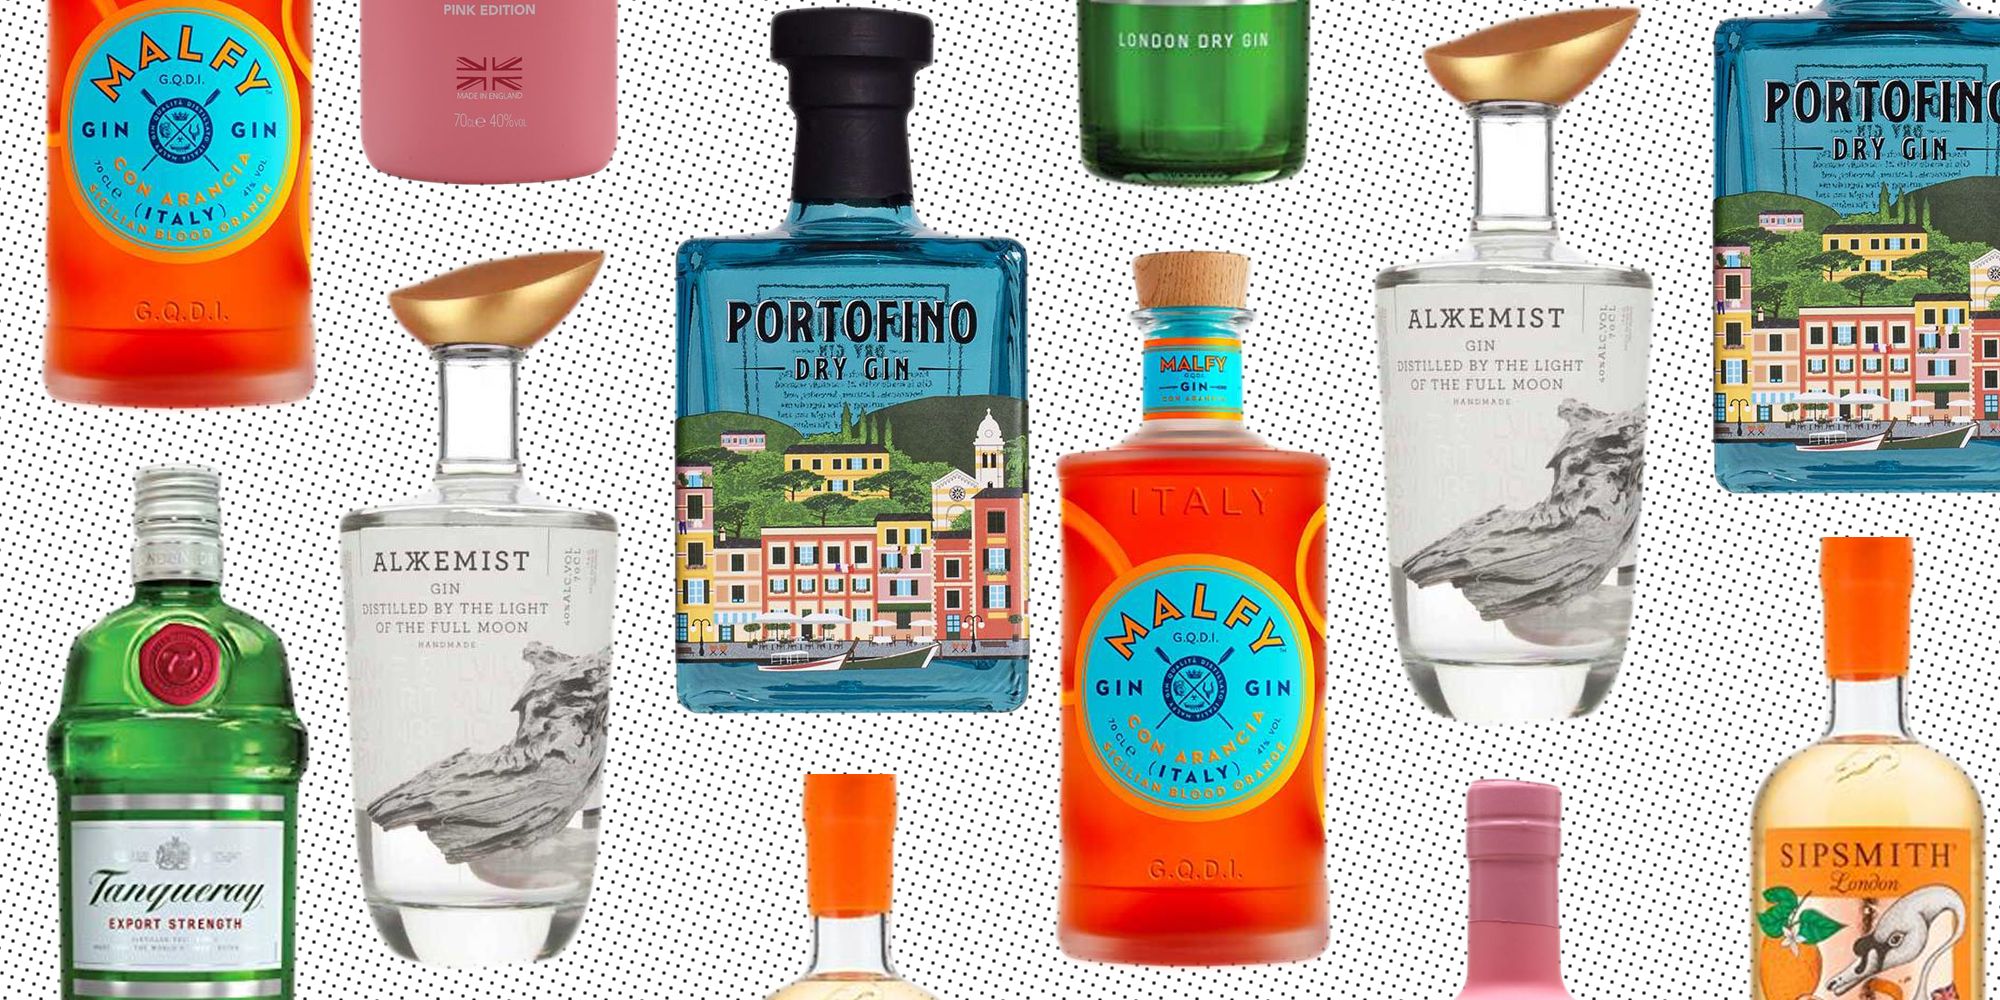 25 Of The Best Gins You Need To Buy For Cocktails, From Bombay Sapphire To Gordon's